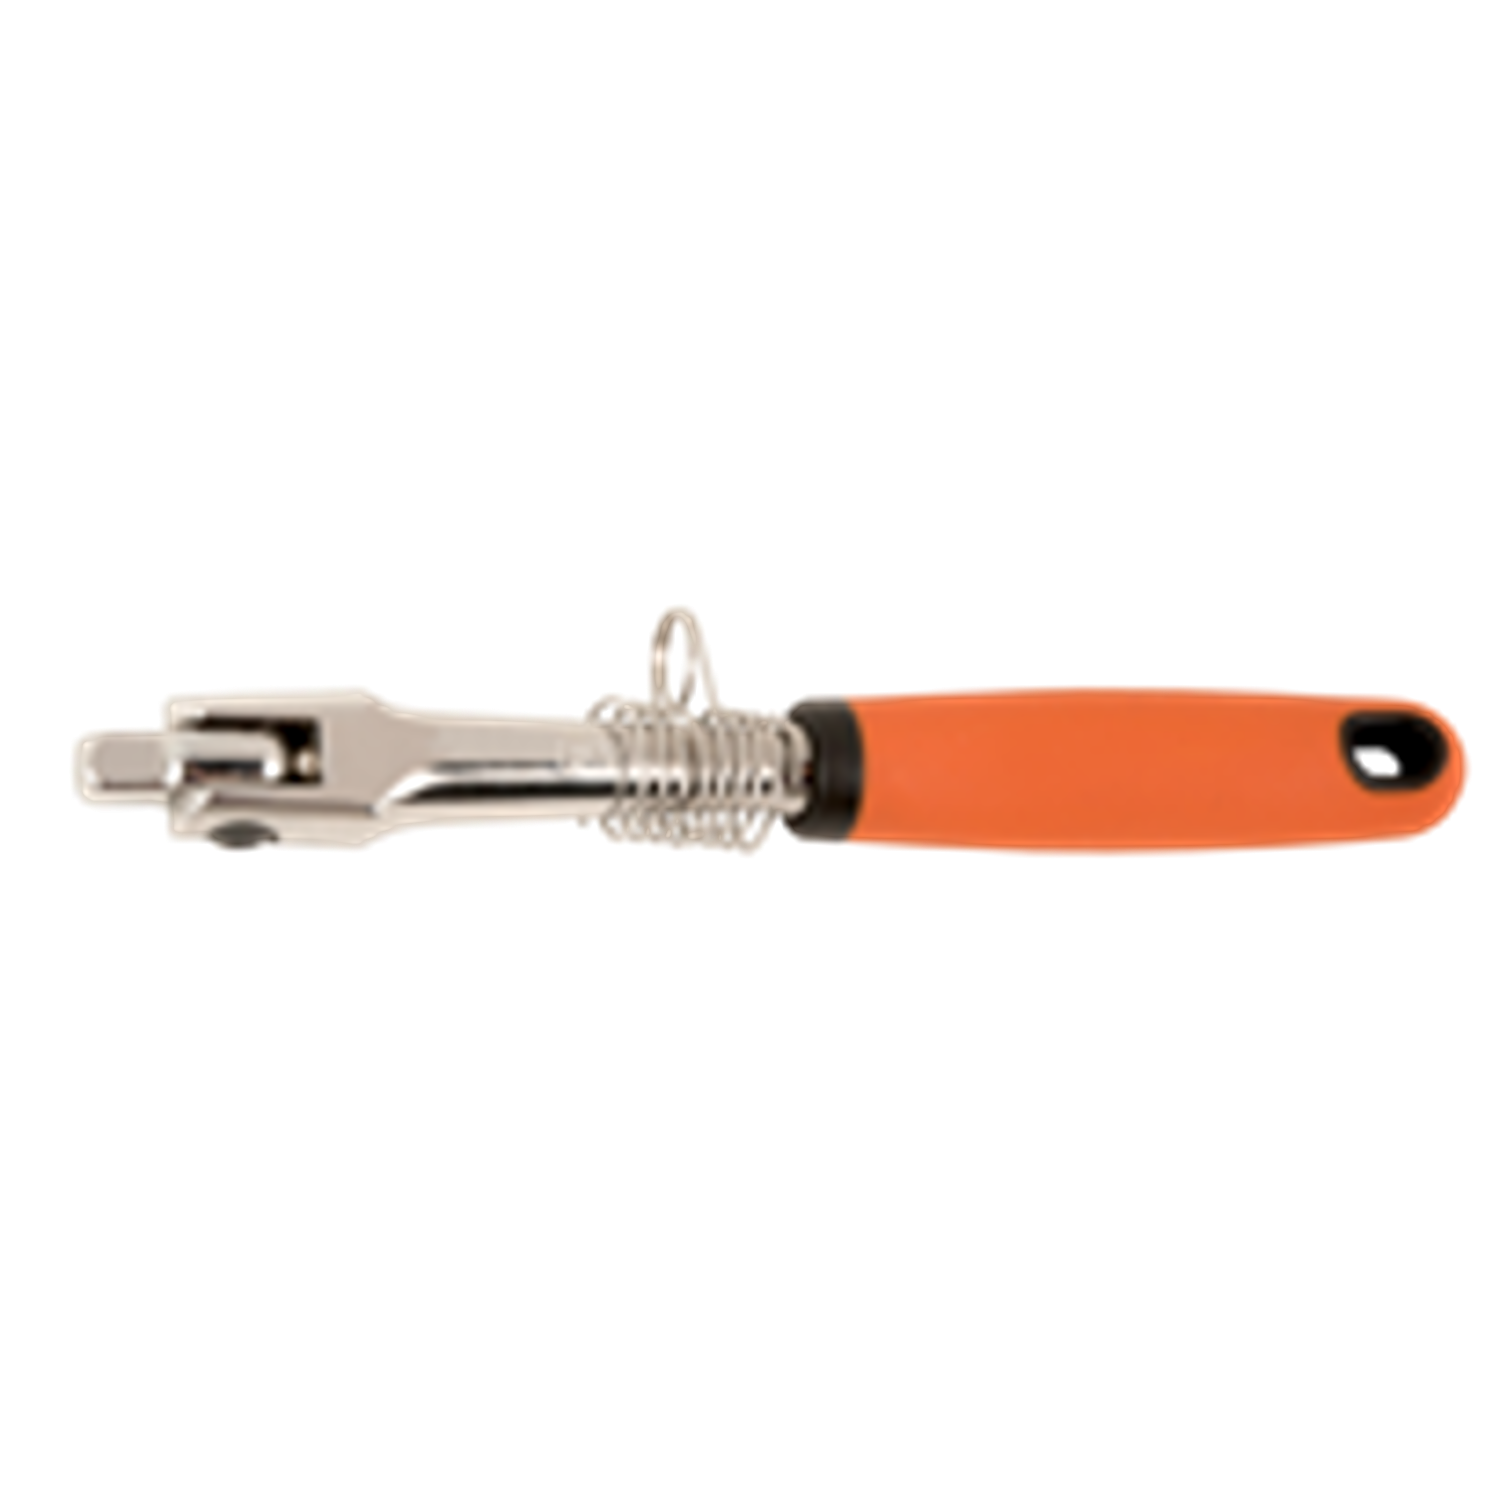 BAHCO TAH6958B-1 1/4” Square Drive Breaker Bar Safety Spring - Premium Breaker Bar from BAHCO - Shop now at Yew Aik.